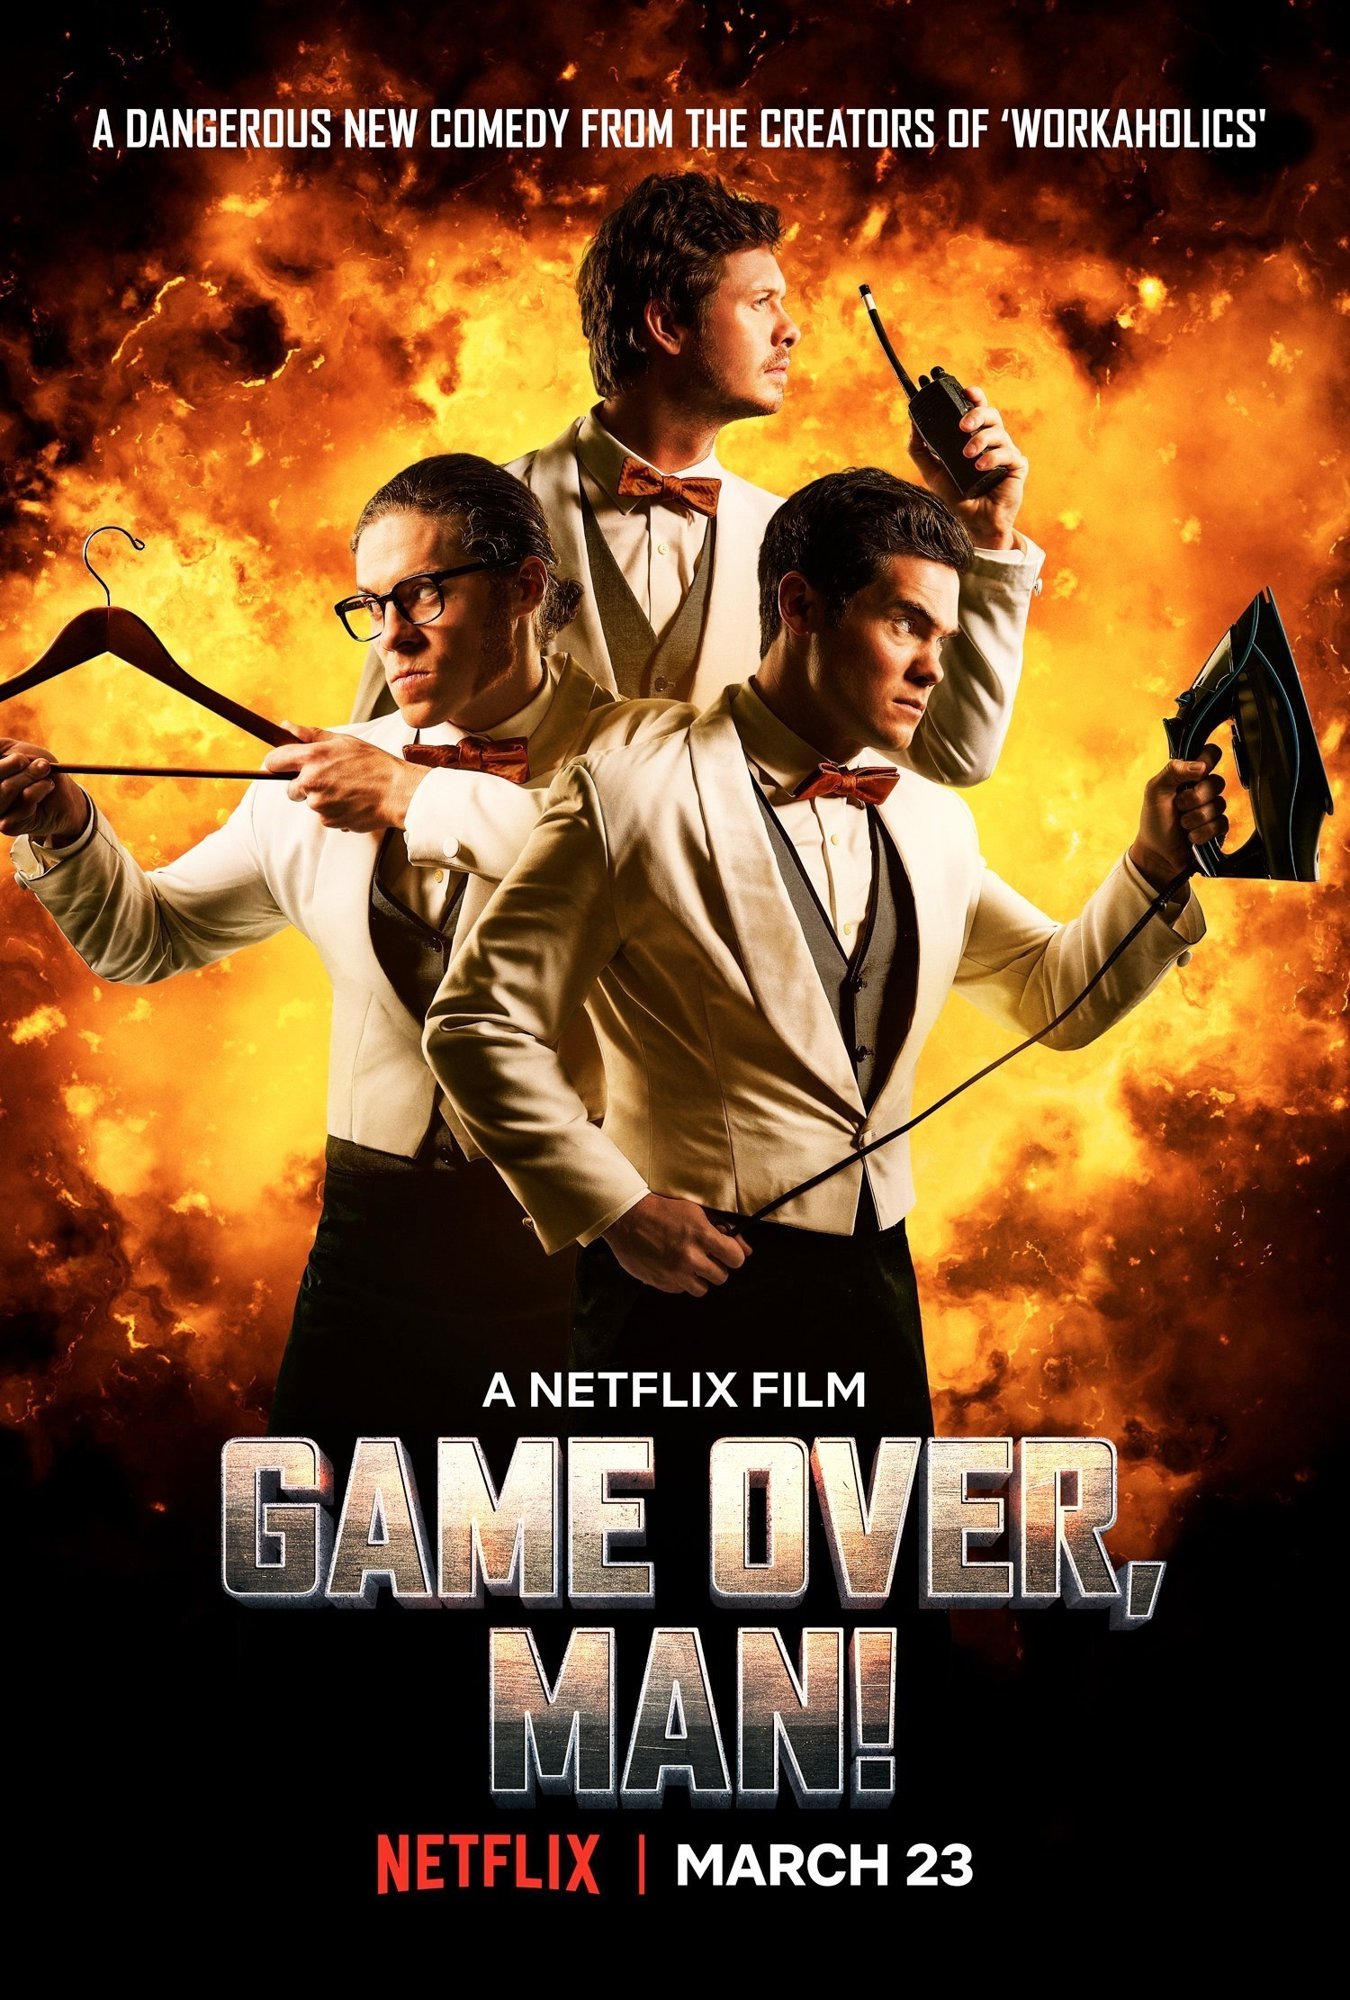 Poster of Netflix's Game Over, Man! (2018)